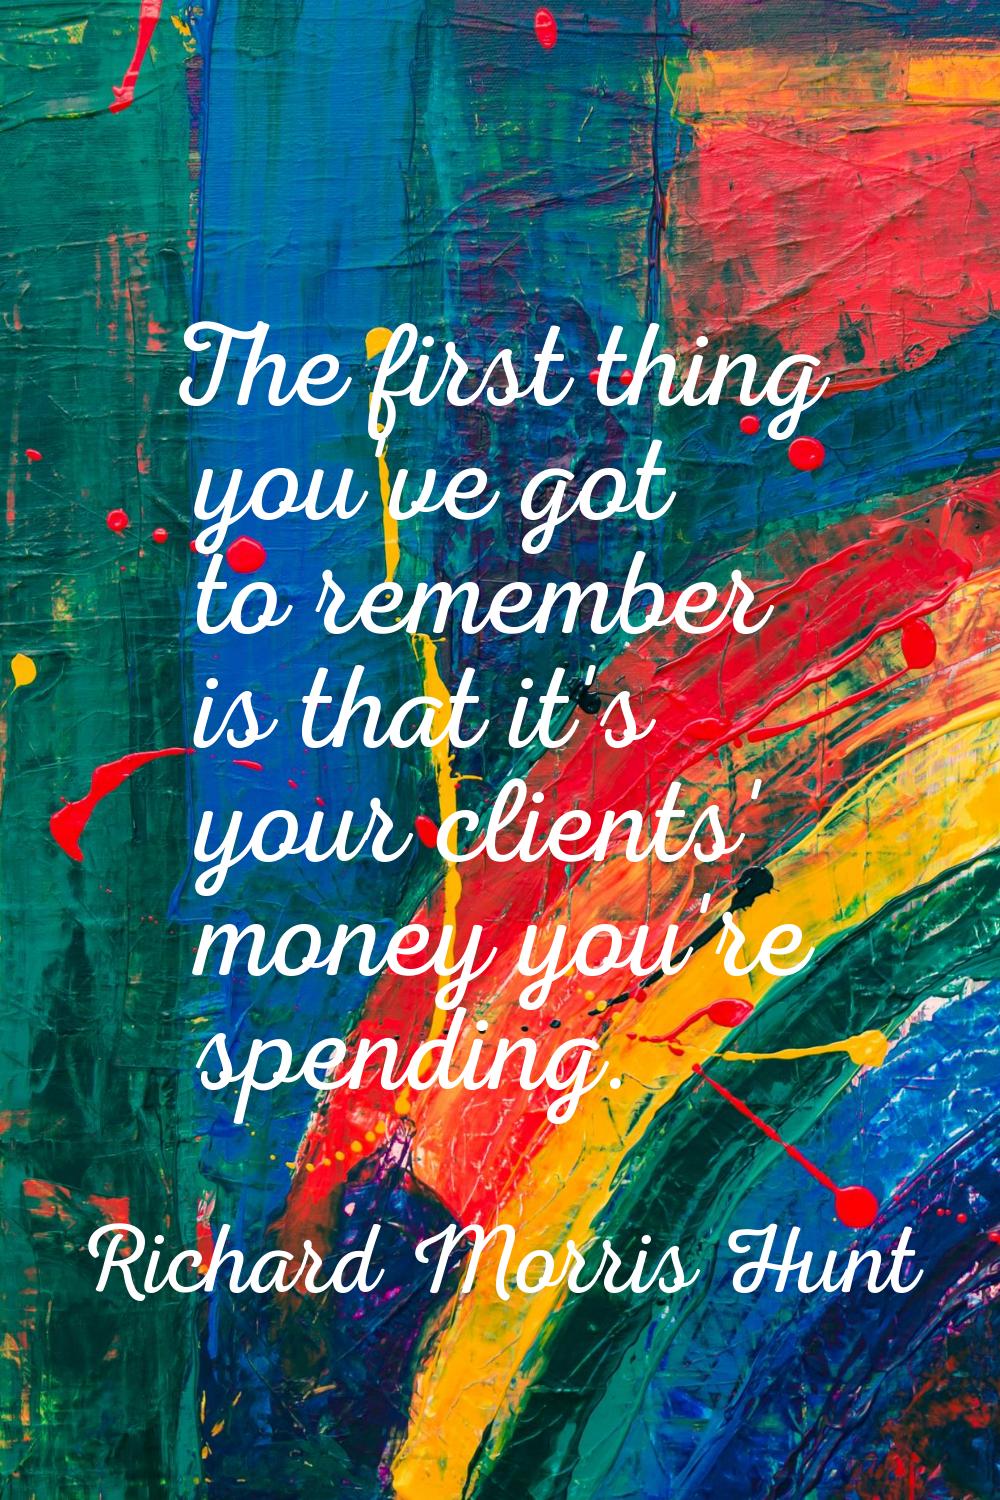 The first thing you've got to remember is that it's your clients' money you're spending.